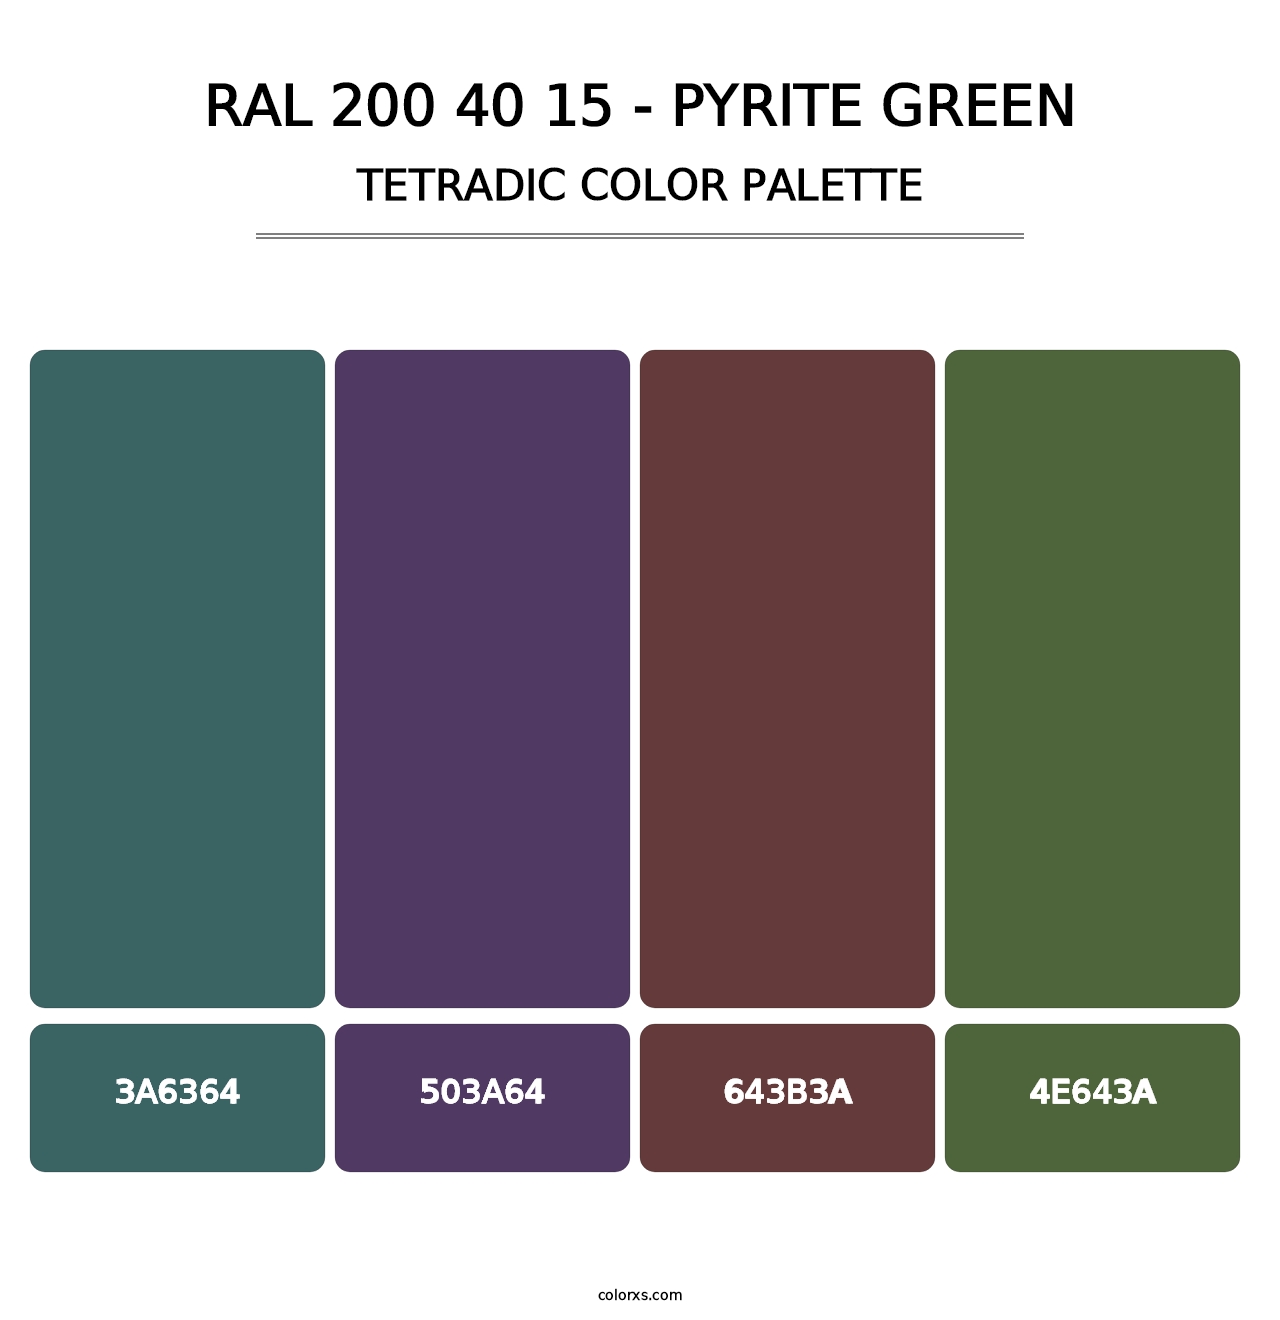 RAL 200 40 15 - Pyrite Green - Tetradic Color Palette